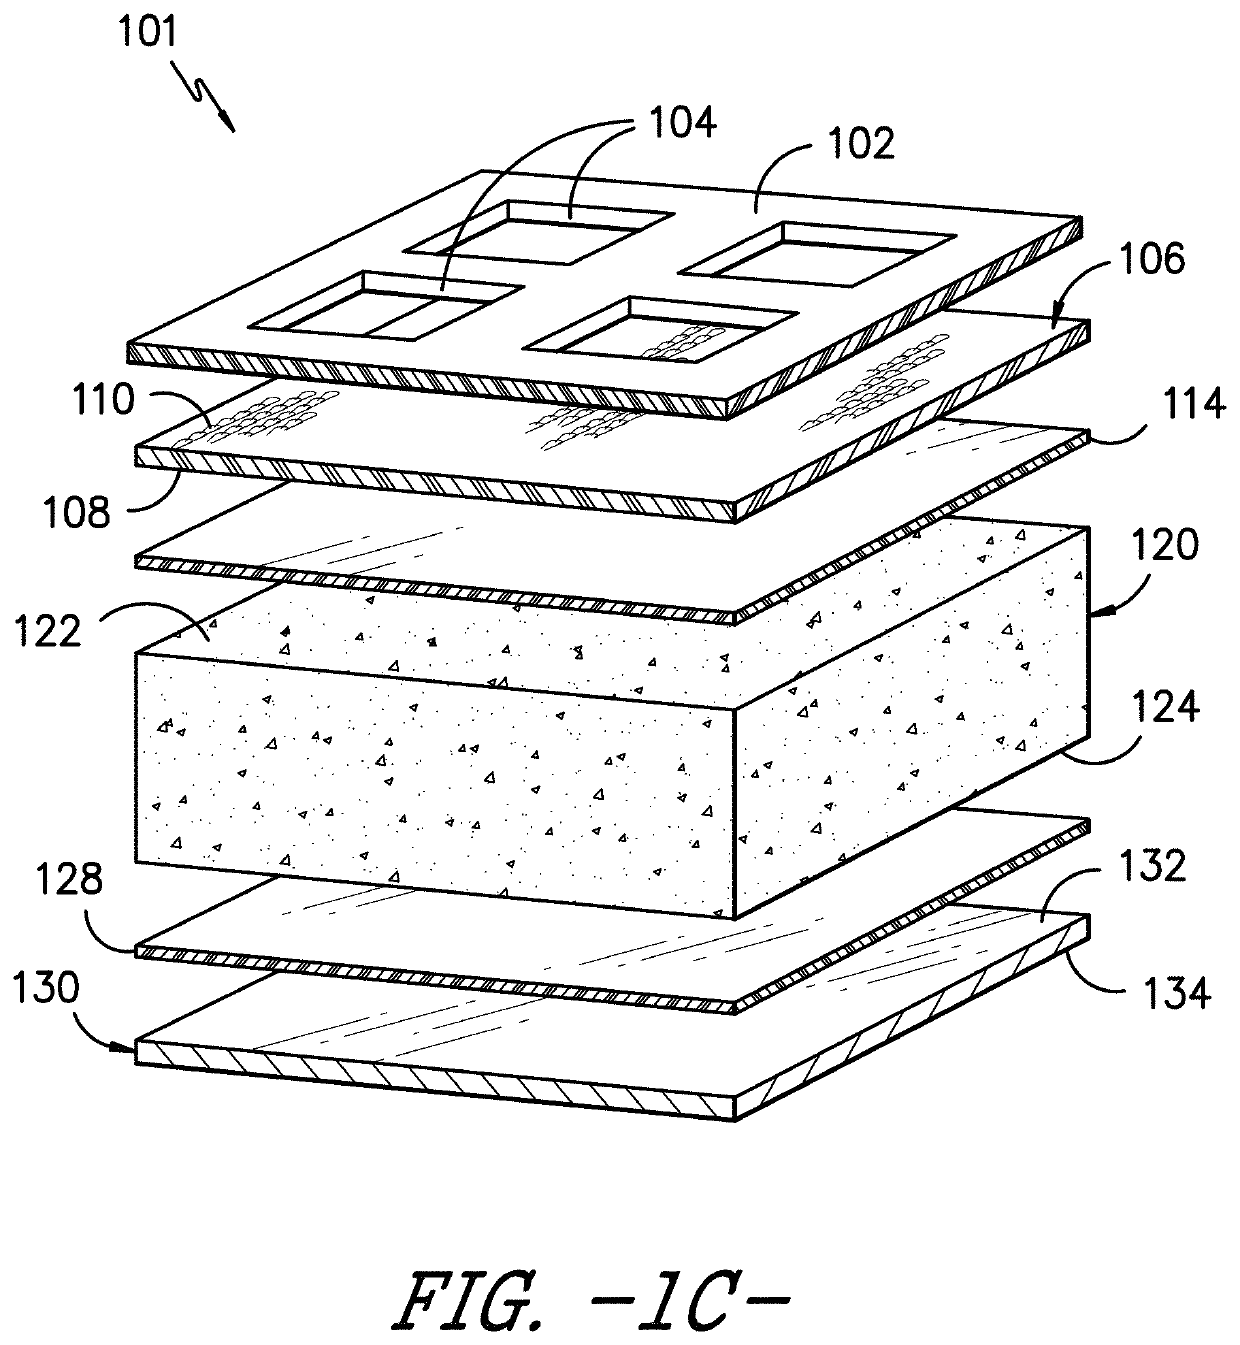 Wound care device having fluid transfer and adhesive properties